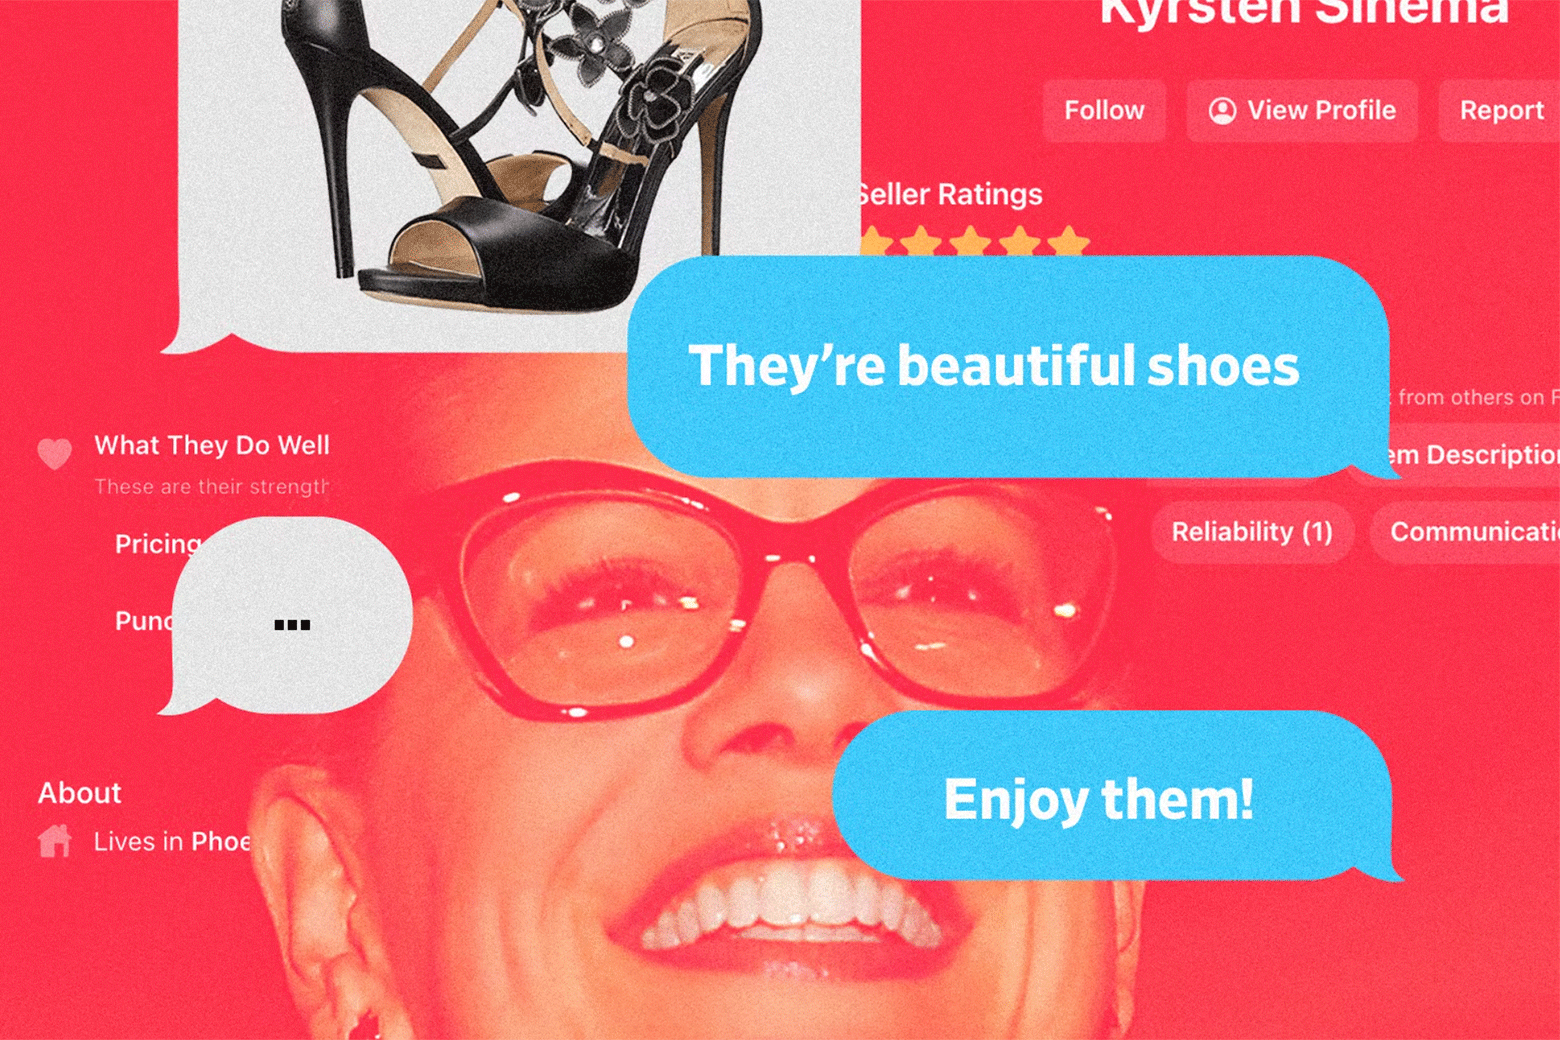 A photo of a woman smiling, with text messages superimposed on her face. The texts say "They're beautiful shoes. Enjoy them!"